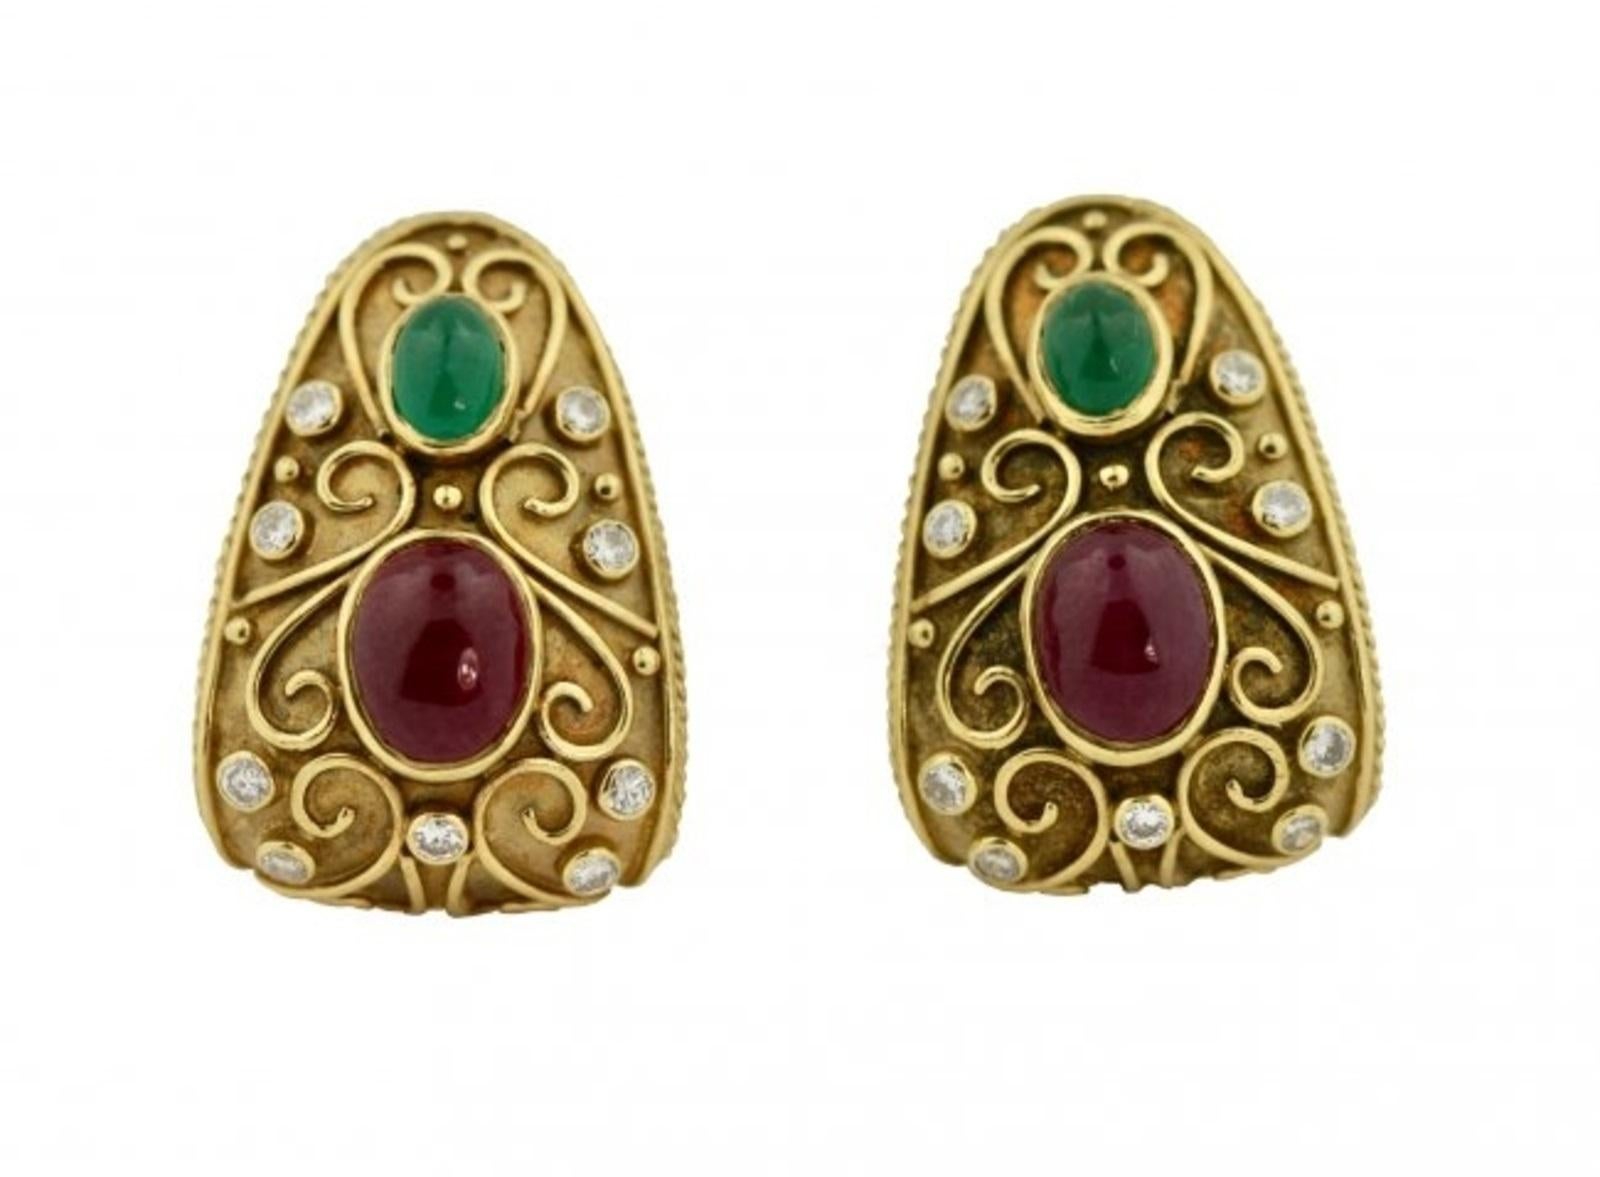 
Pair of Gold, Cabochon Ruby, Emerald and Diamond Earrings
DIMENSIONS
W 0.81 in. x D 0.61 in.
W 20 mm x D 15 mm
LENGTH
1.22 in. (34 mm)
WEIGHT
31.6 g